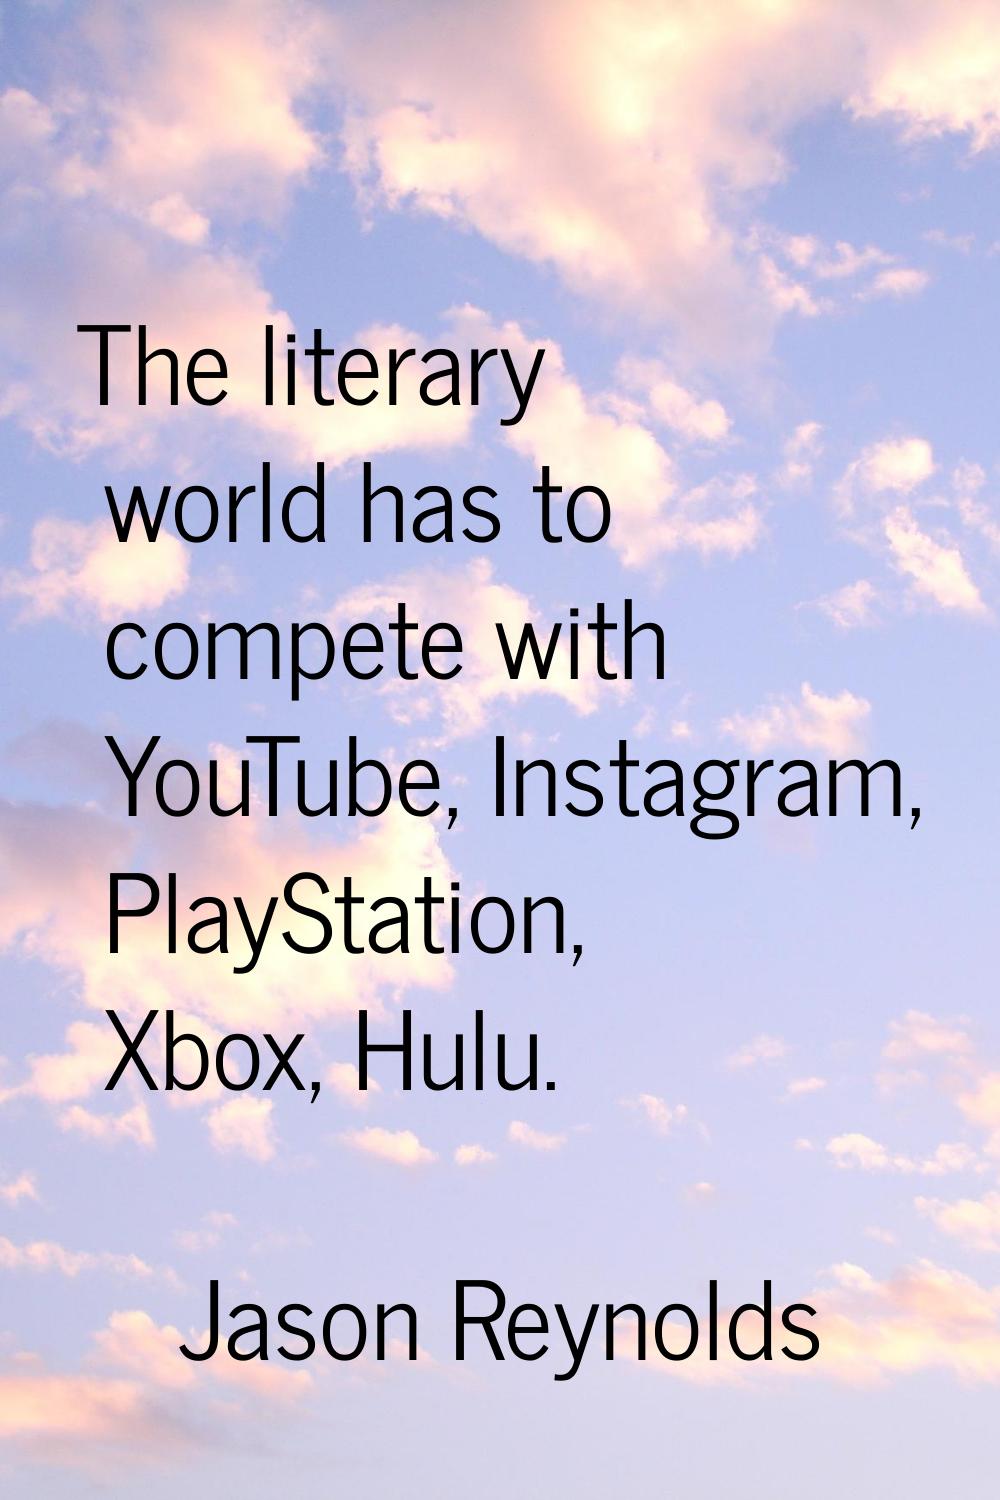 The literary world has to compete with YouTube, Instagram, PlayStation, Xbox, Hulu.